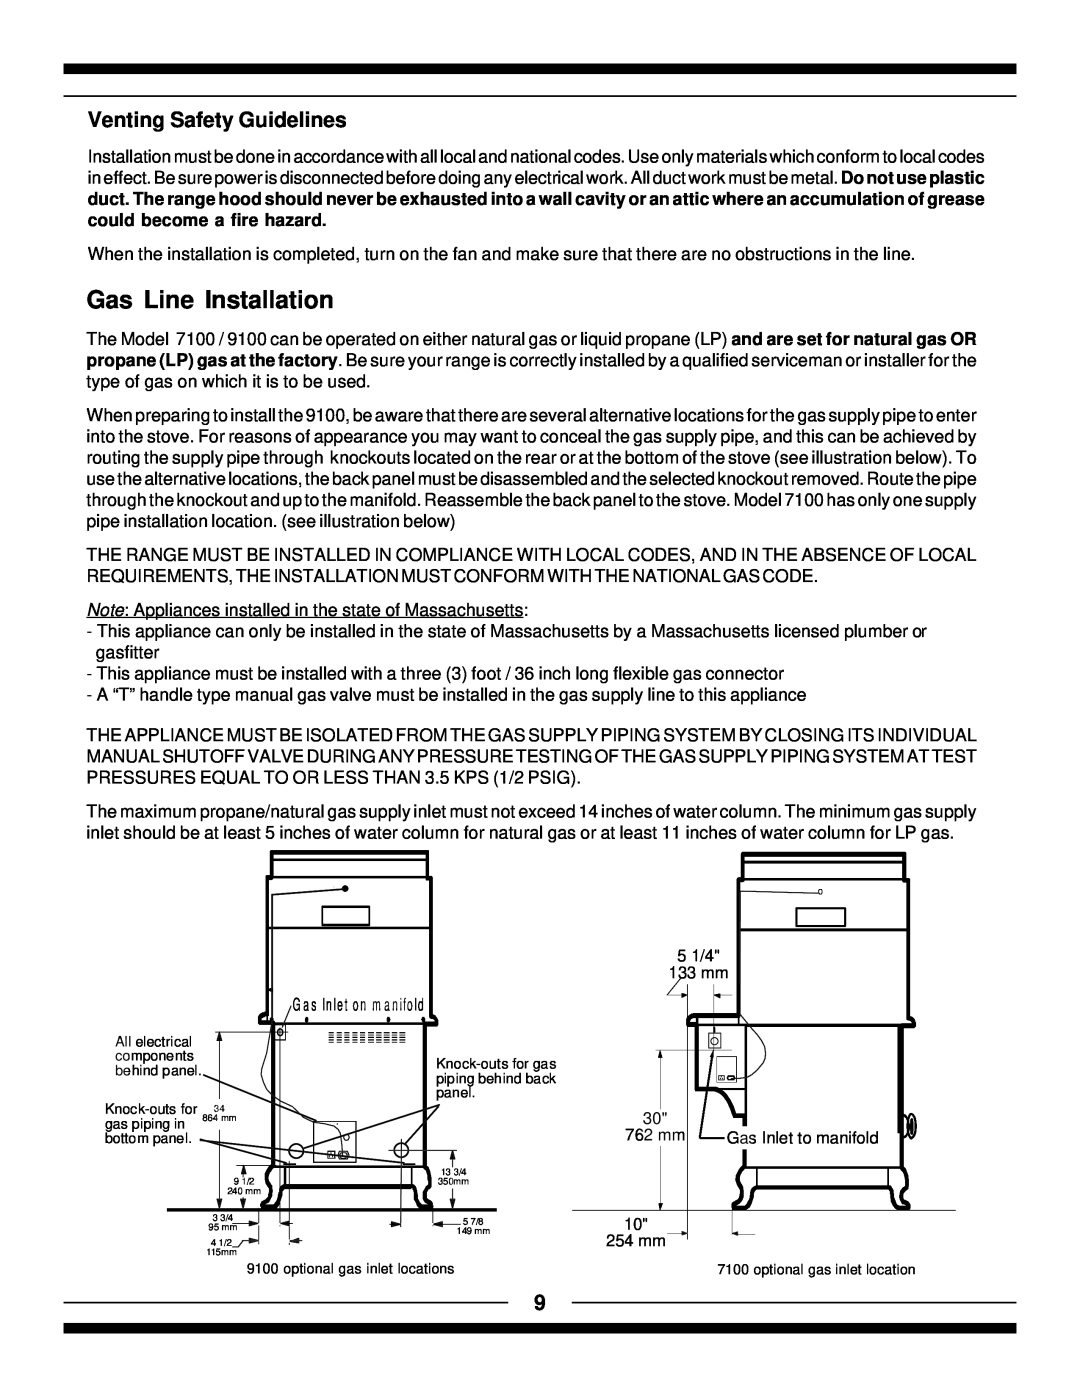 Hearth and Home Technologies 9100, 7100 manual Gas Line Installation, Venting Safety Guidelines 